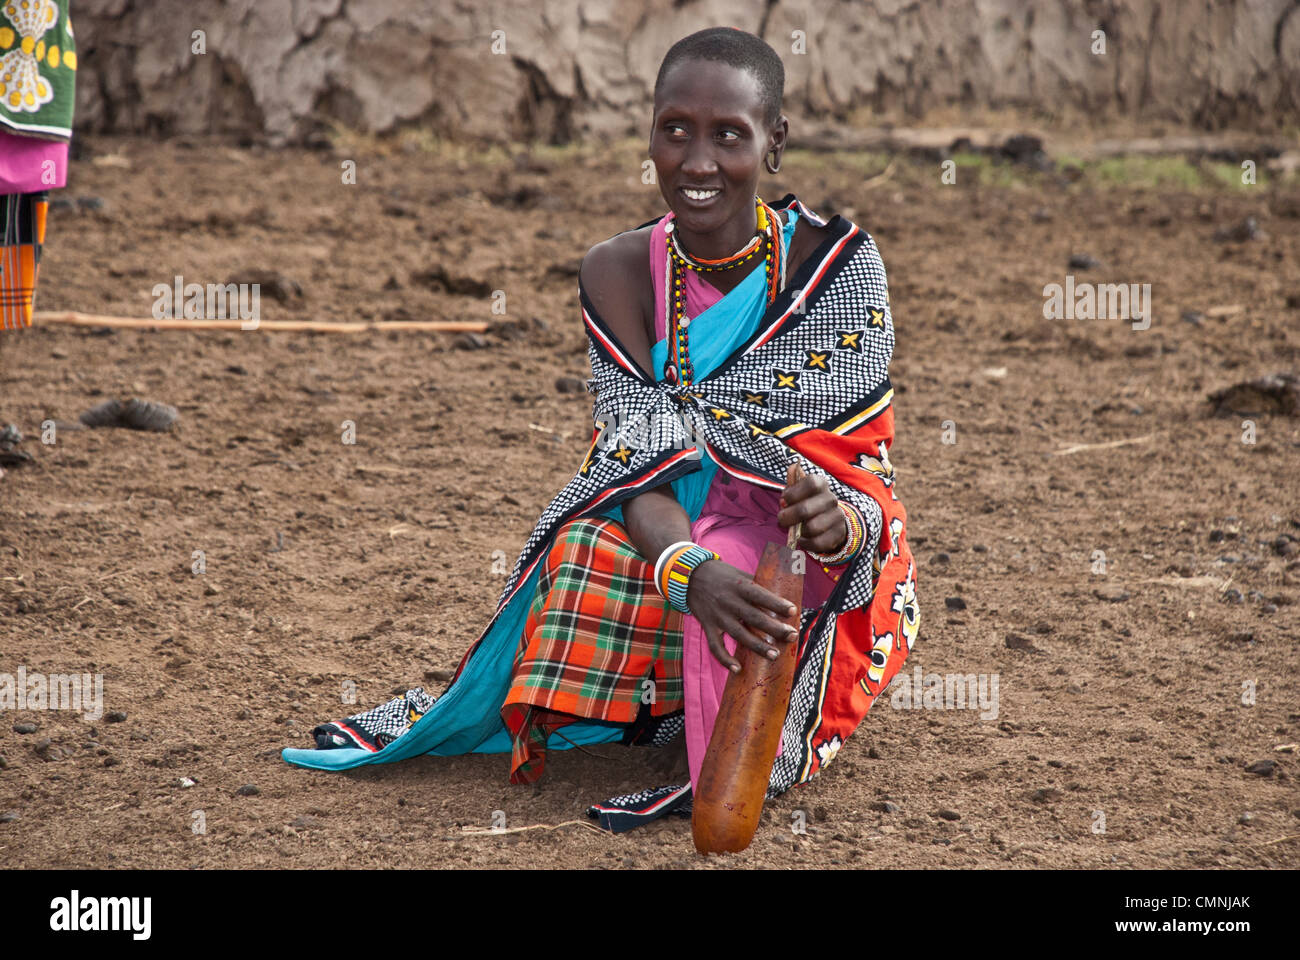 Masai woman, wearing colorful traditional clothes, stirring a cow's blood in a gourd to remove the clots before it is consumed. Stock Photo